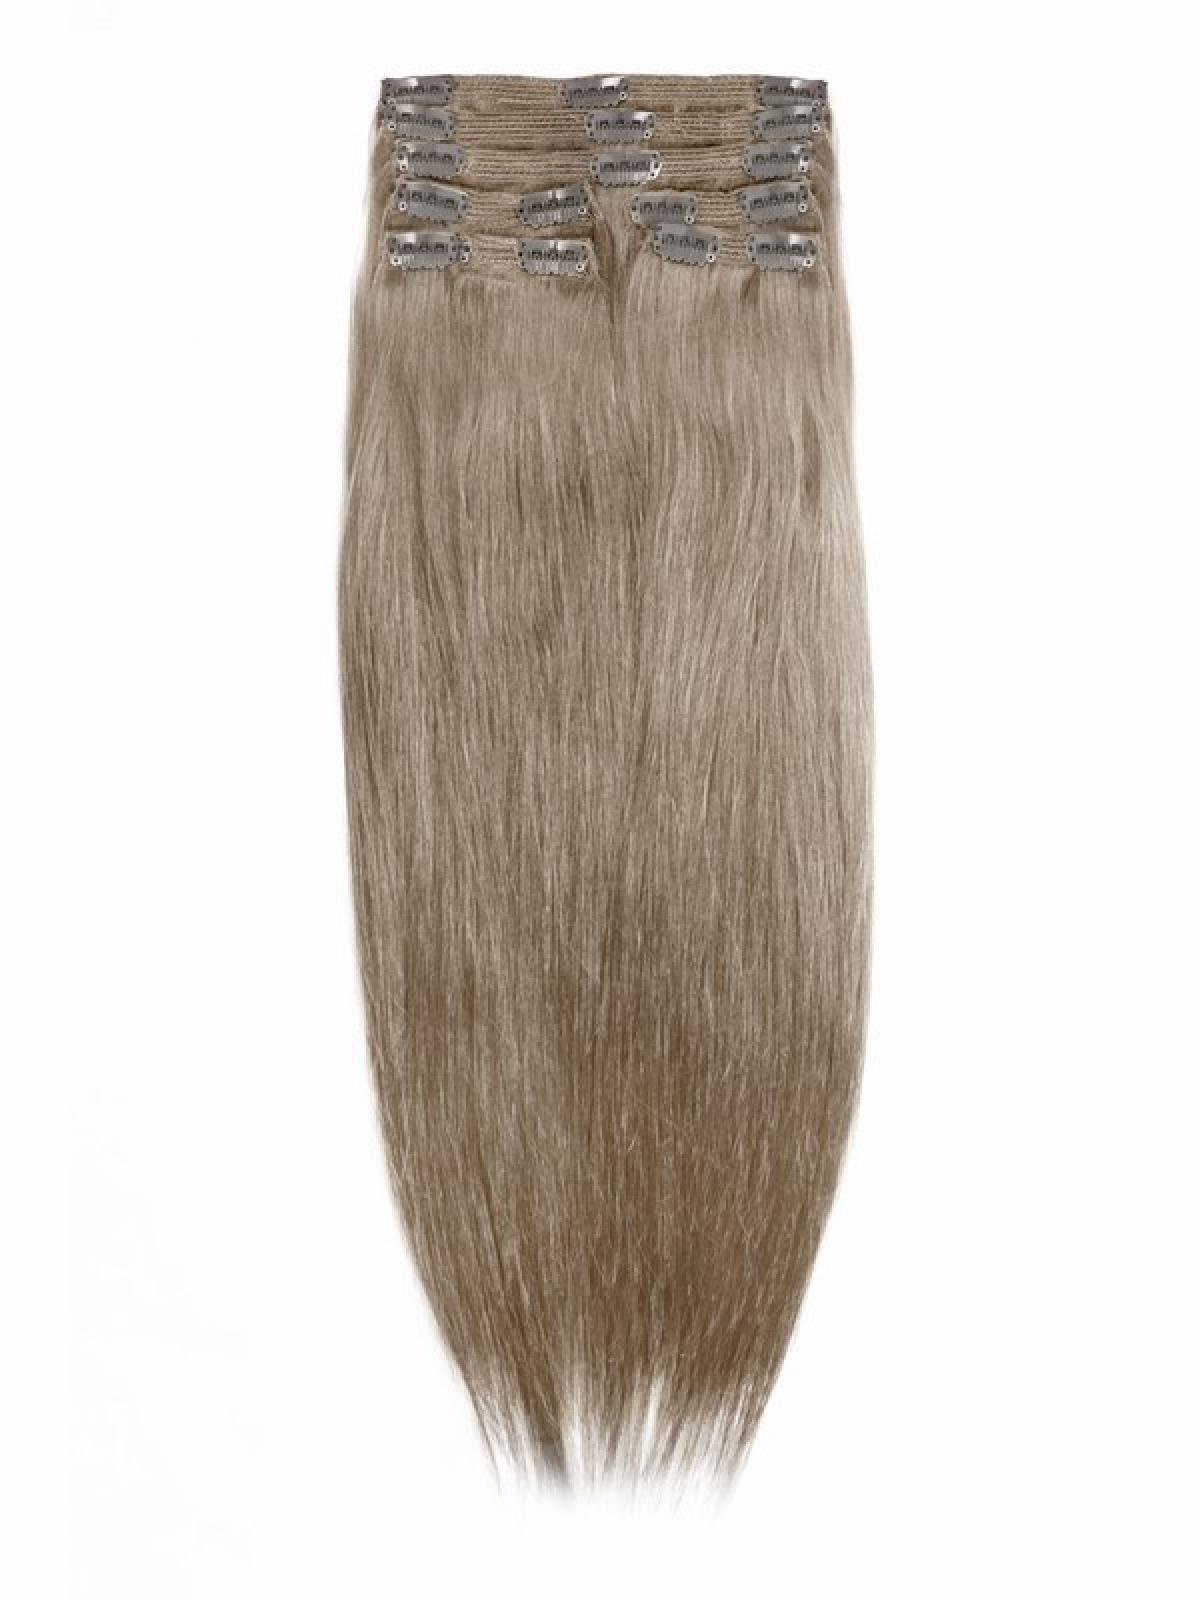 Medium Golden Brown indian remy clip in hair extensions SD011 - Hair